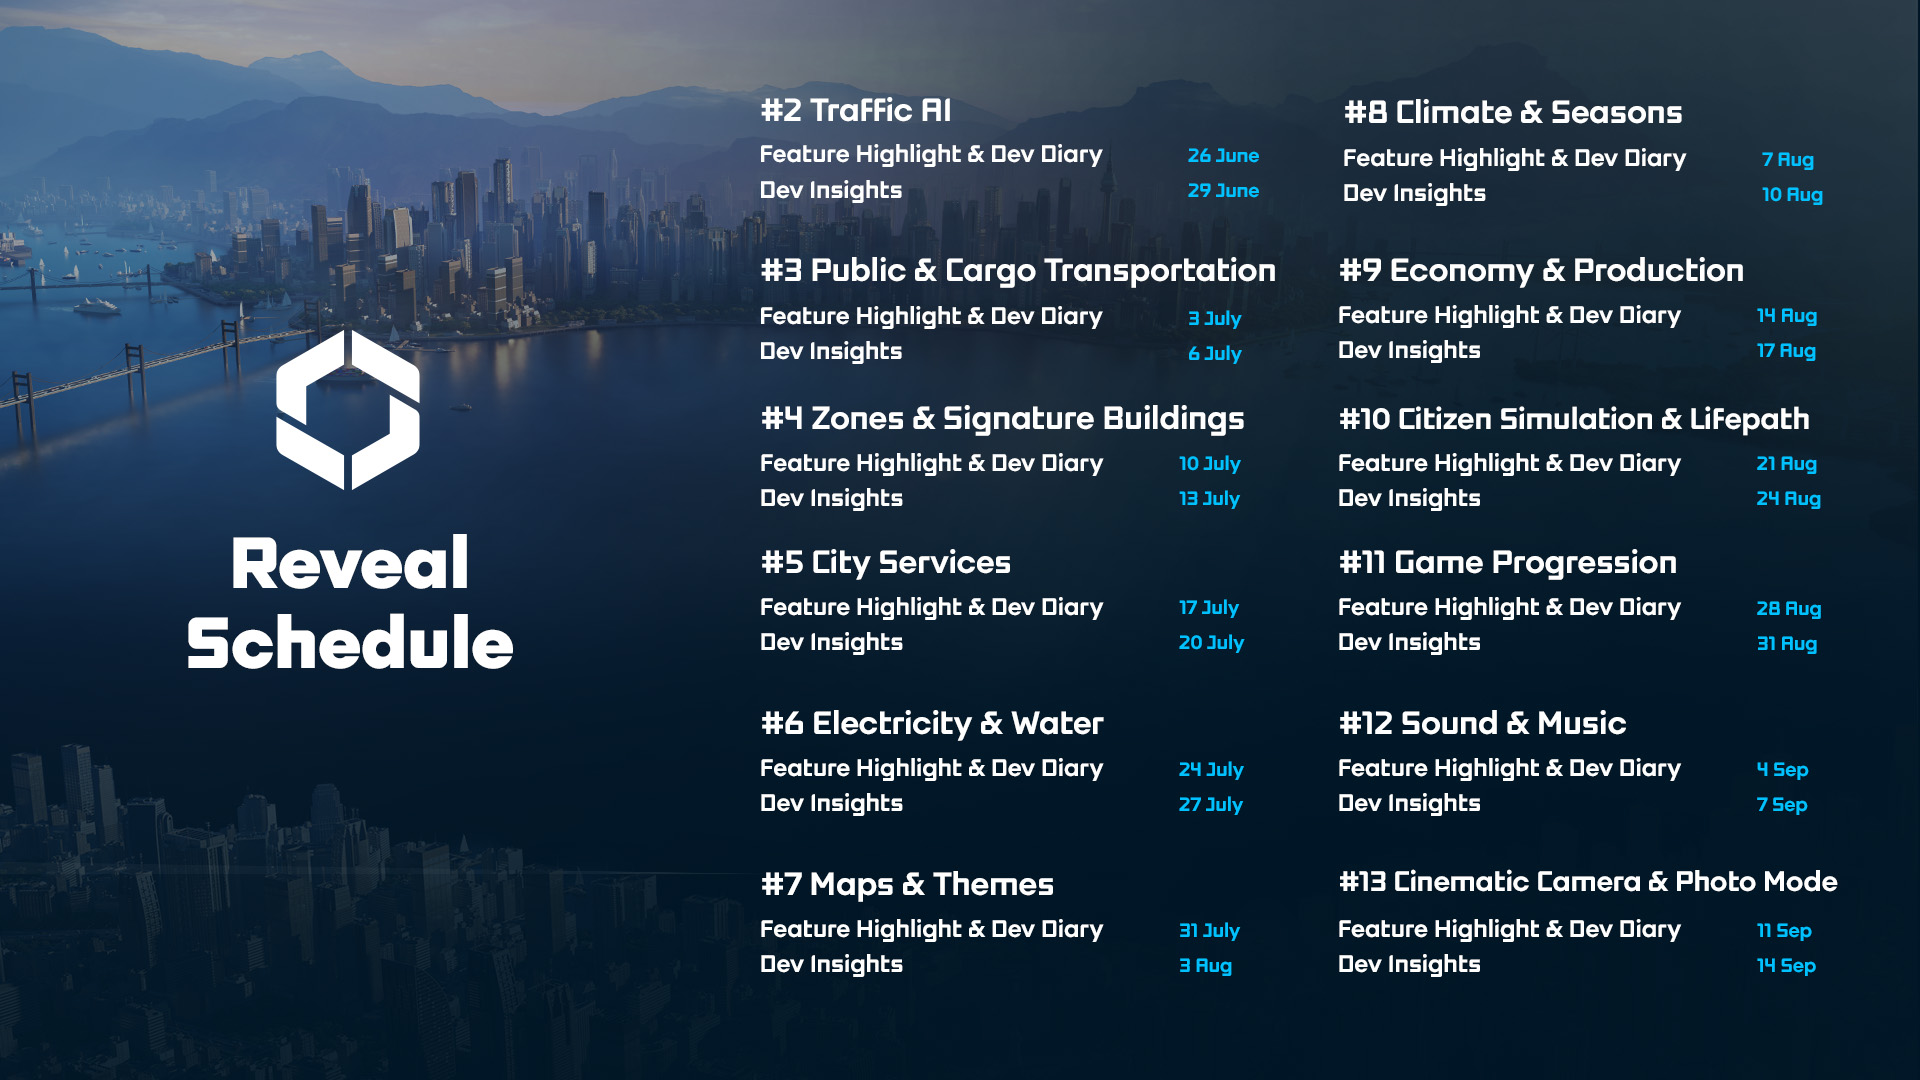 Official reveal schedule, see https://www.paradoxinteractive.com/games/cities-skylines-ii/features